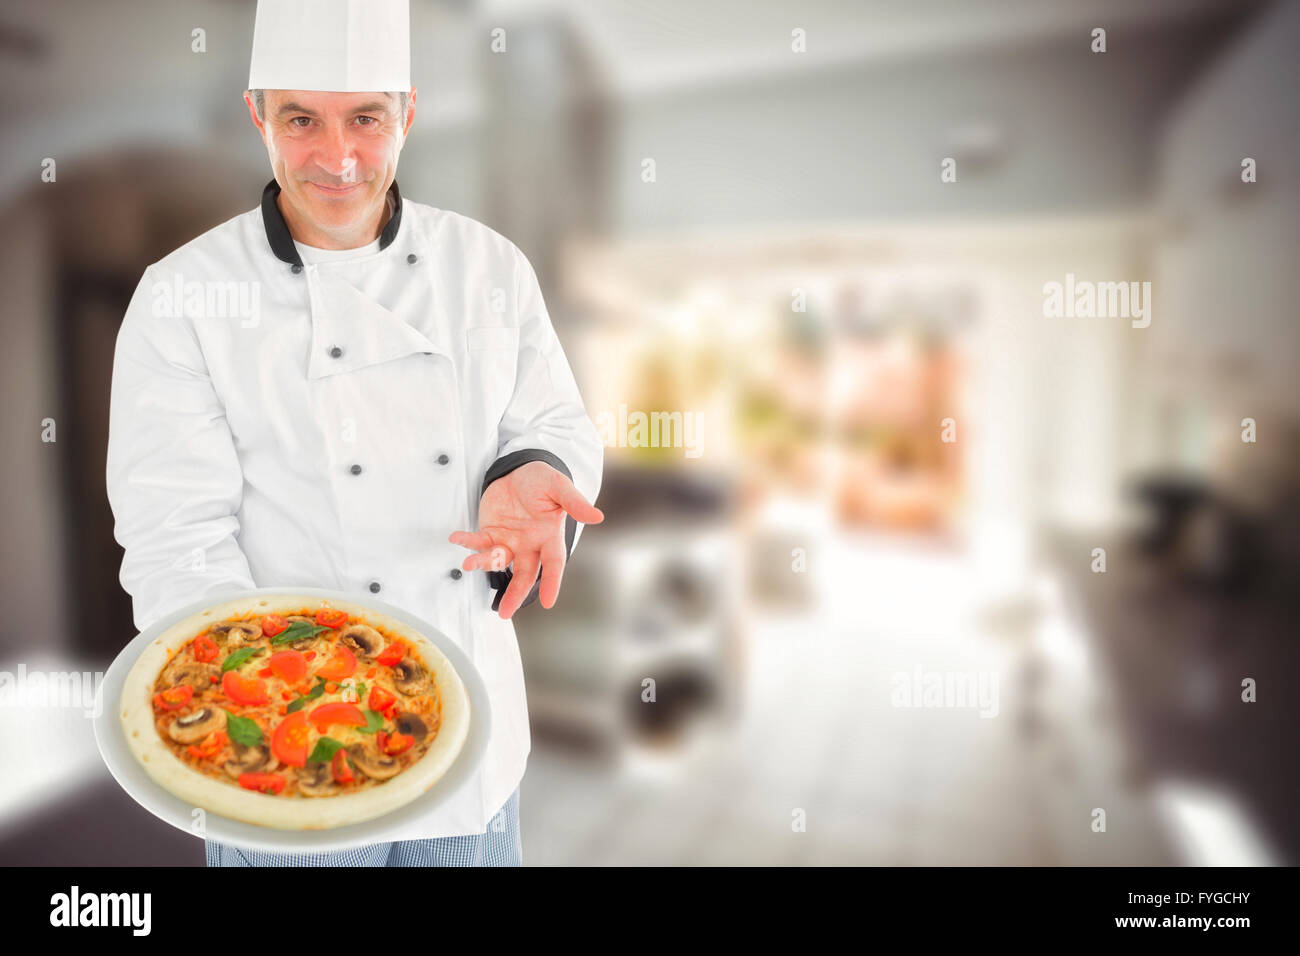 Composite image of chef displaying delicious pizza Stock Photo